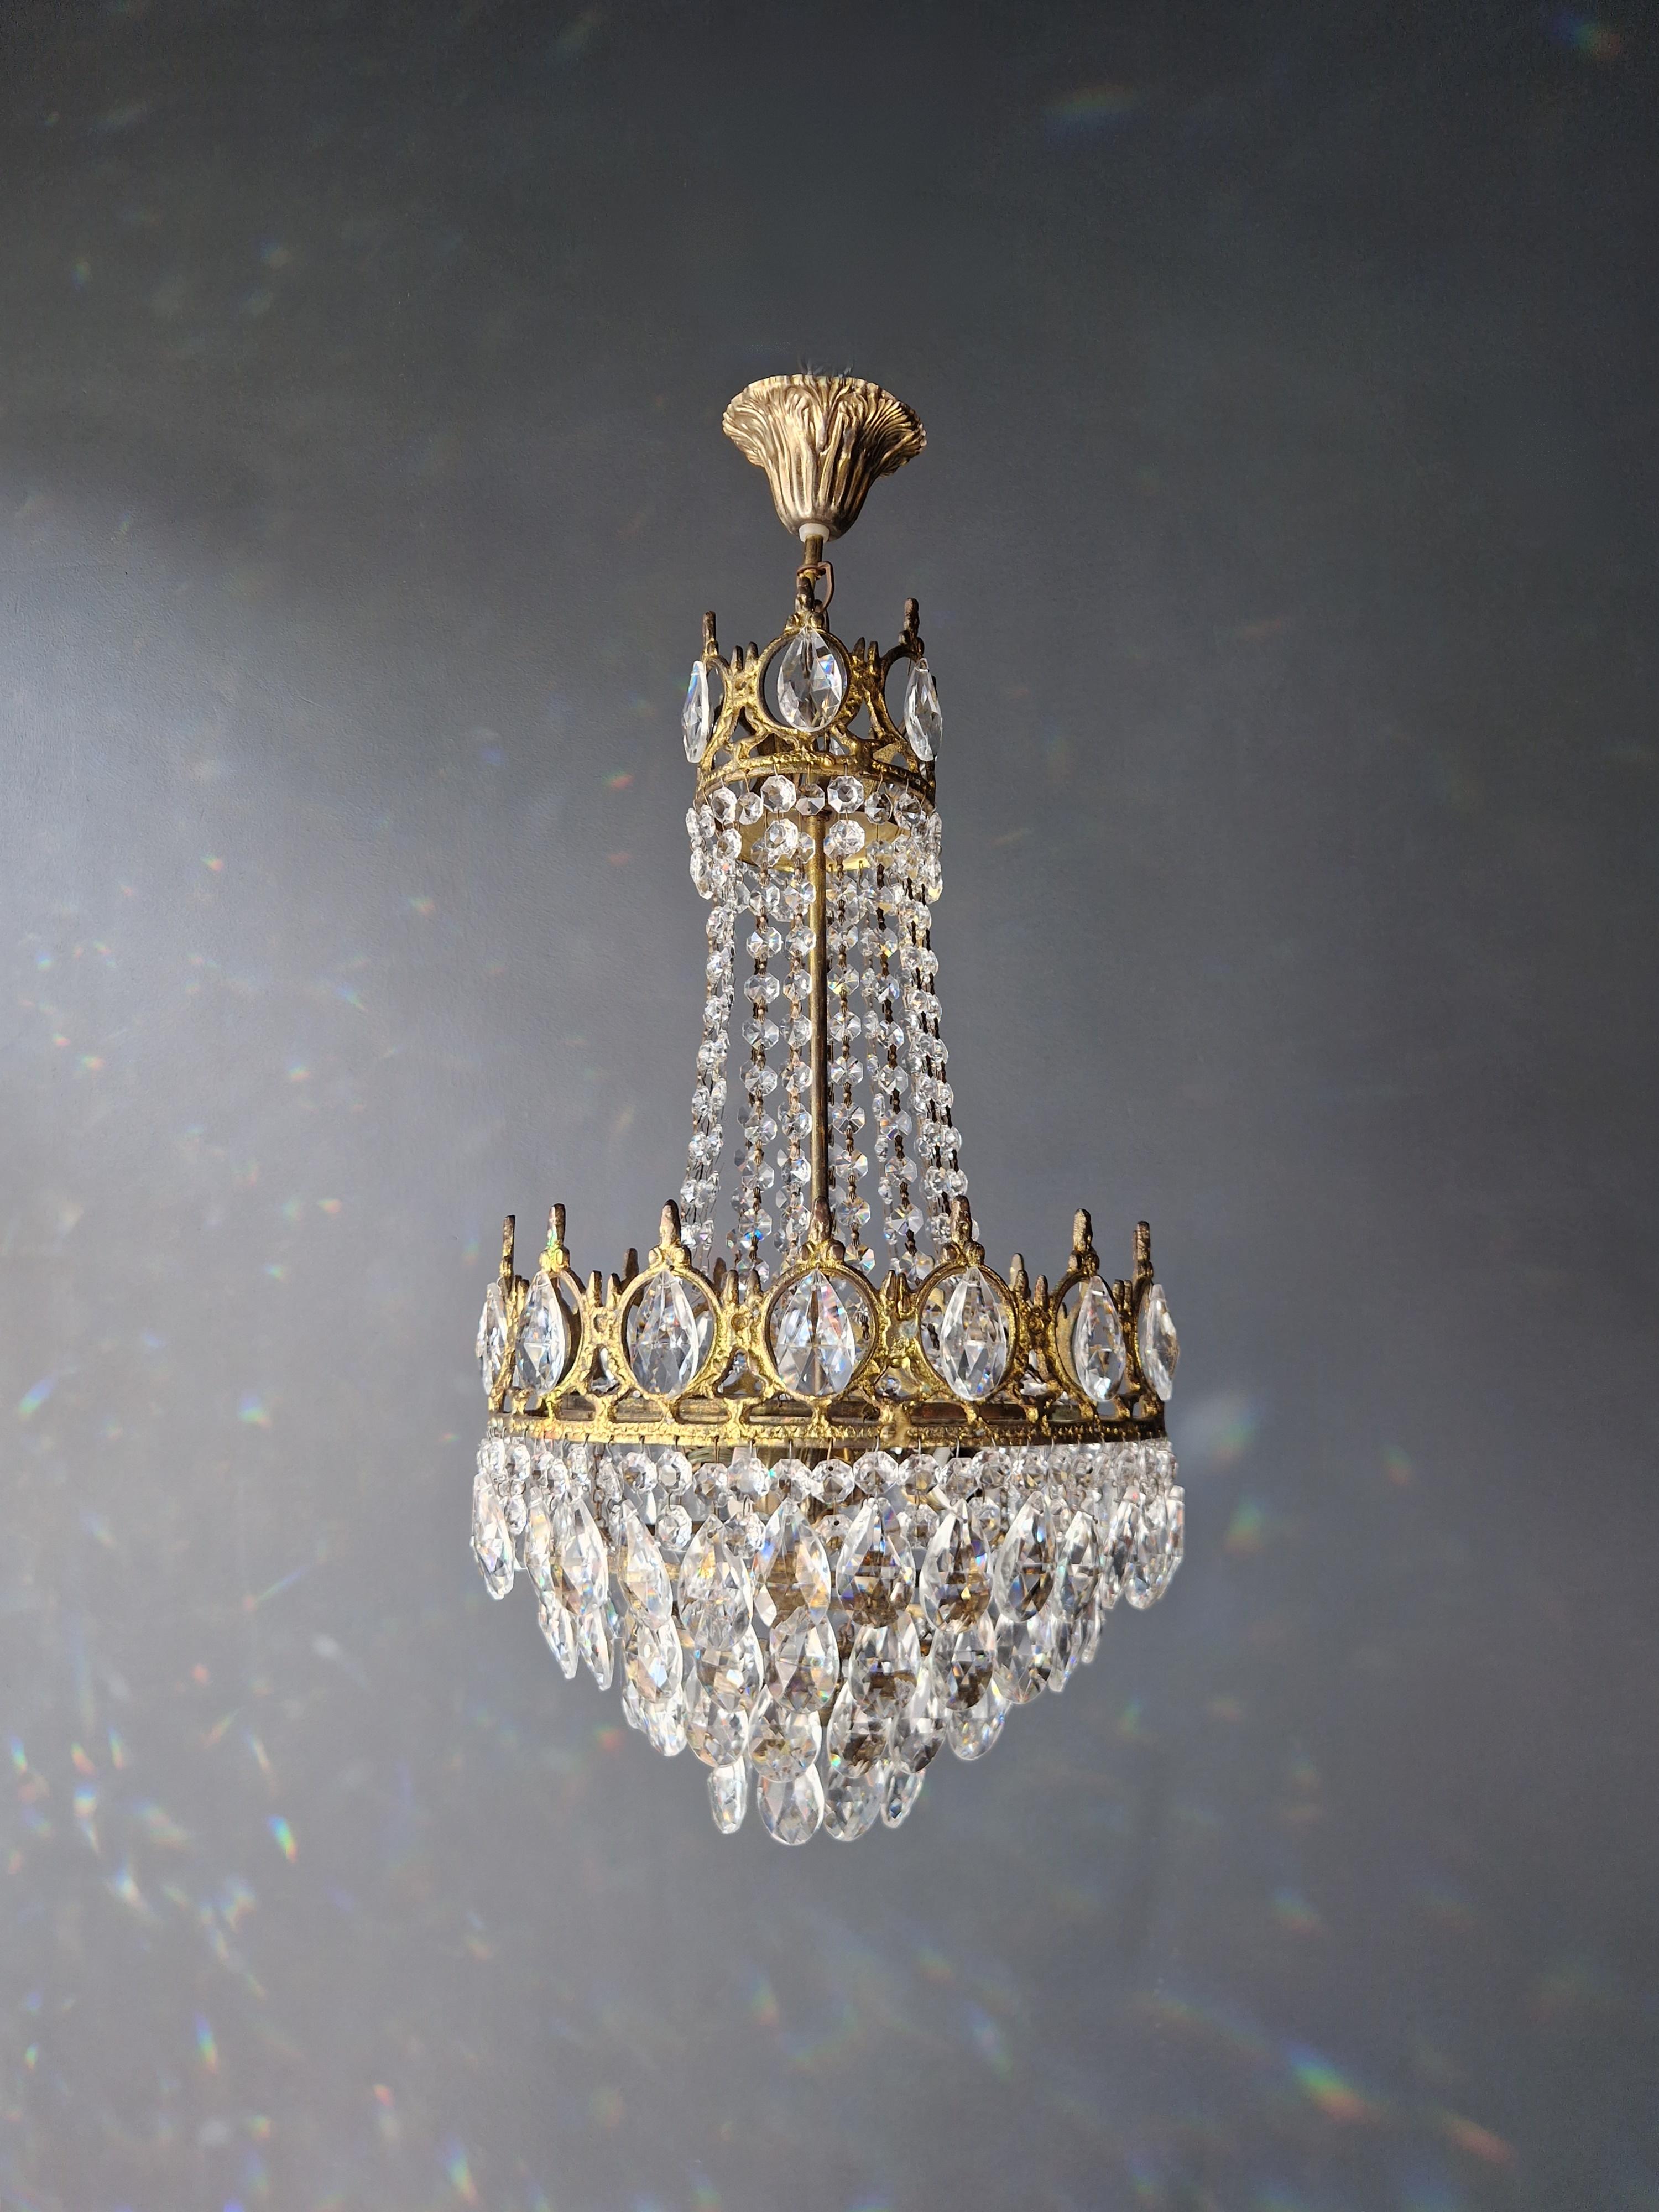 Introducing our exquisitely restored old chandelier from Berlin! This stunning piece has been professionally refurbished with care and love, and its electrical wiring is compatible with the US. It has been re-wired and is ready to be hung, boasting